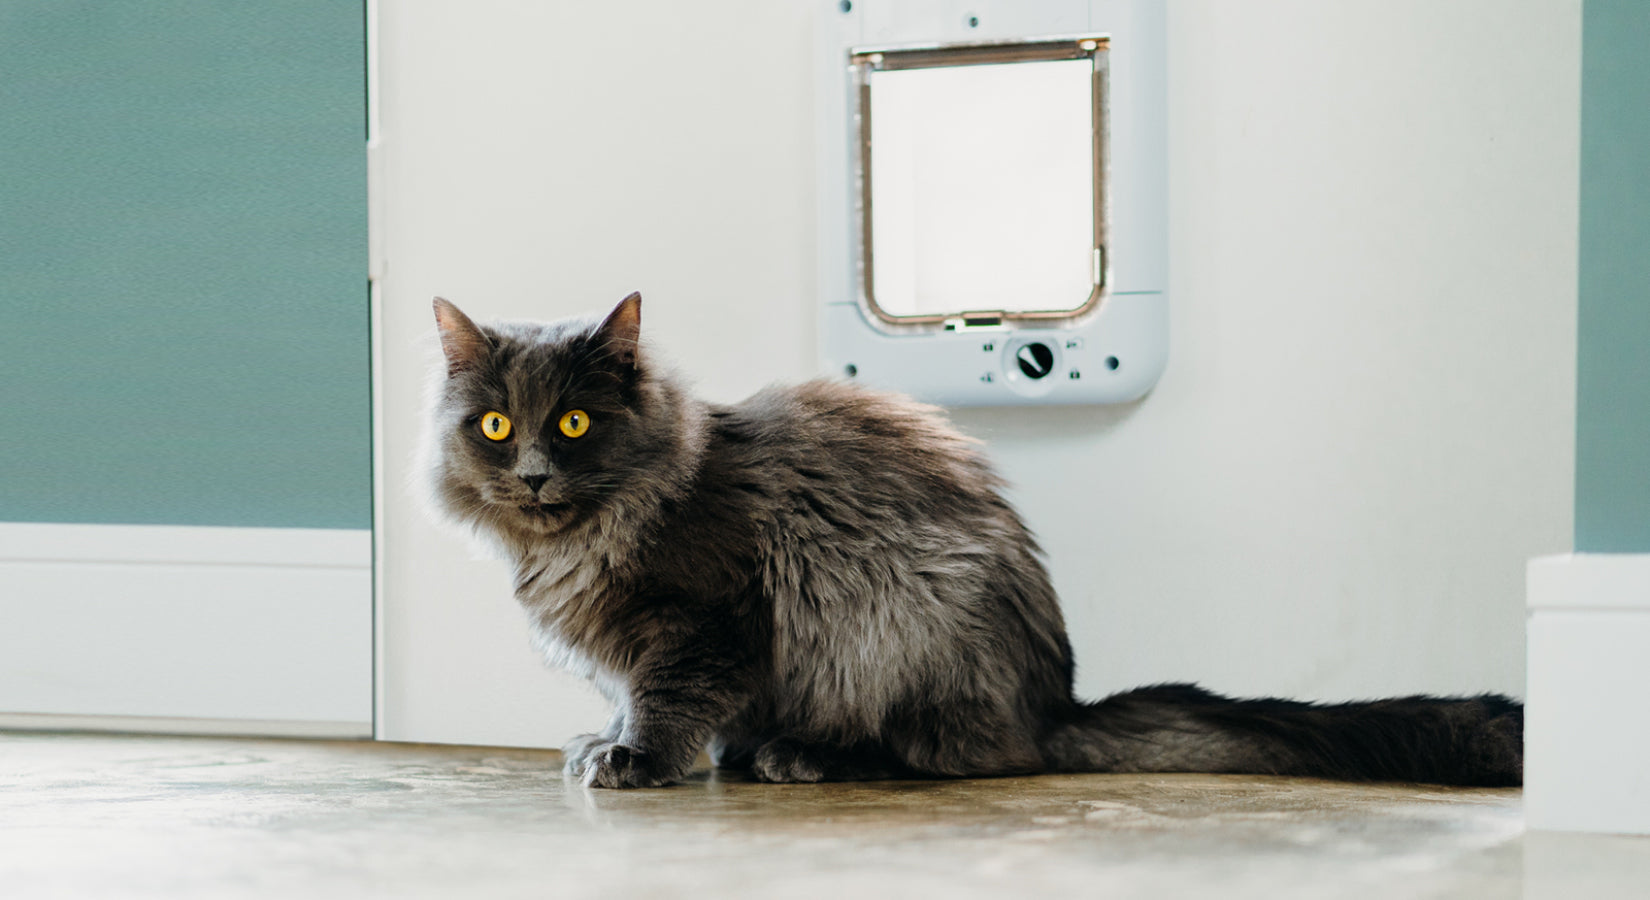 5 reasons to install a cat flap or dog door in your home